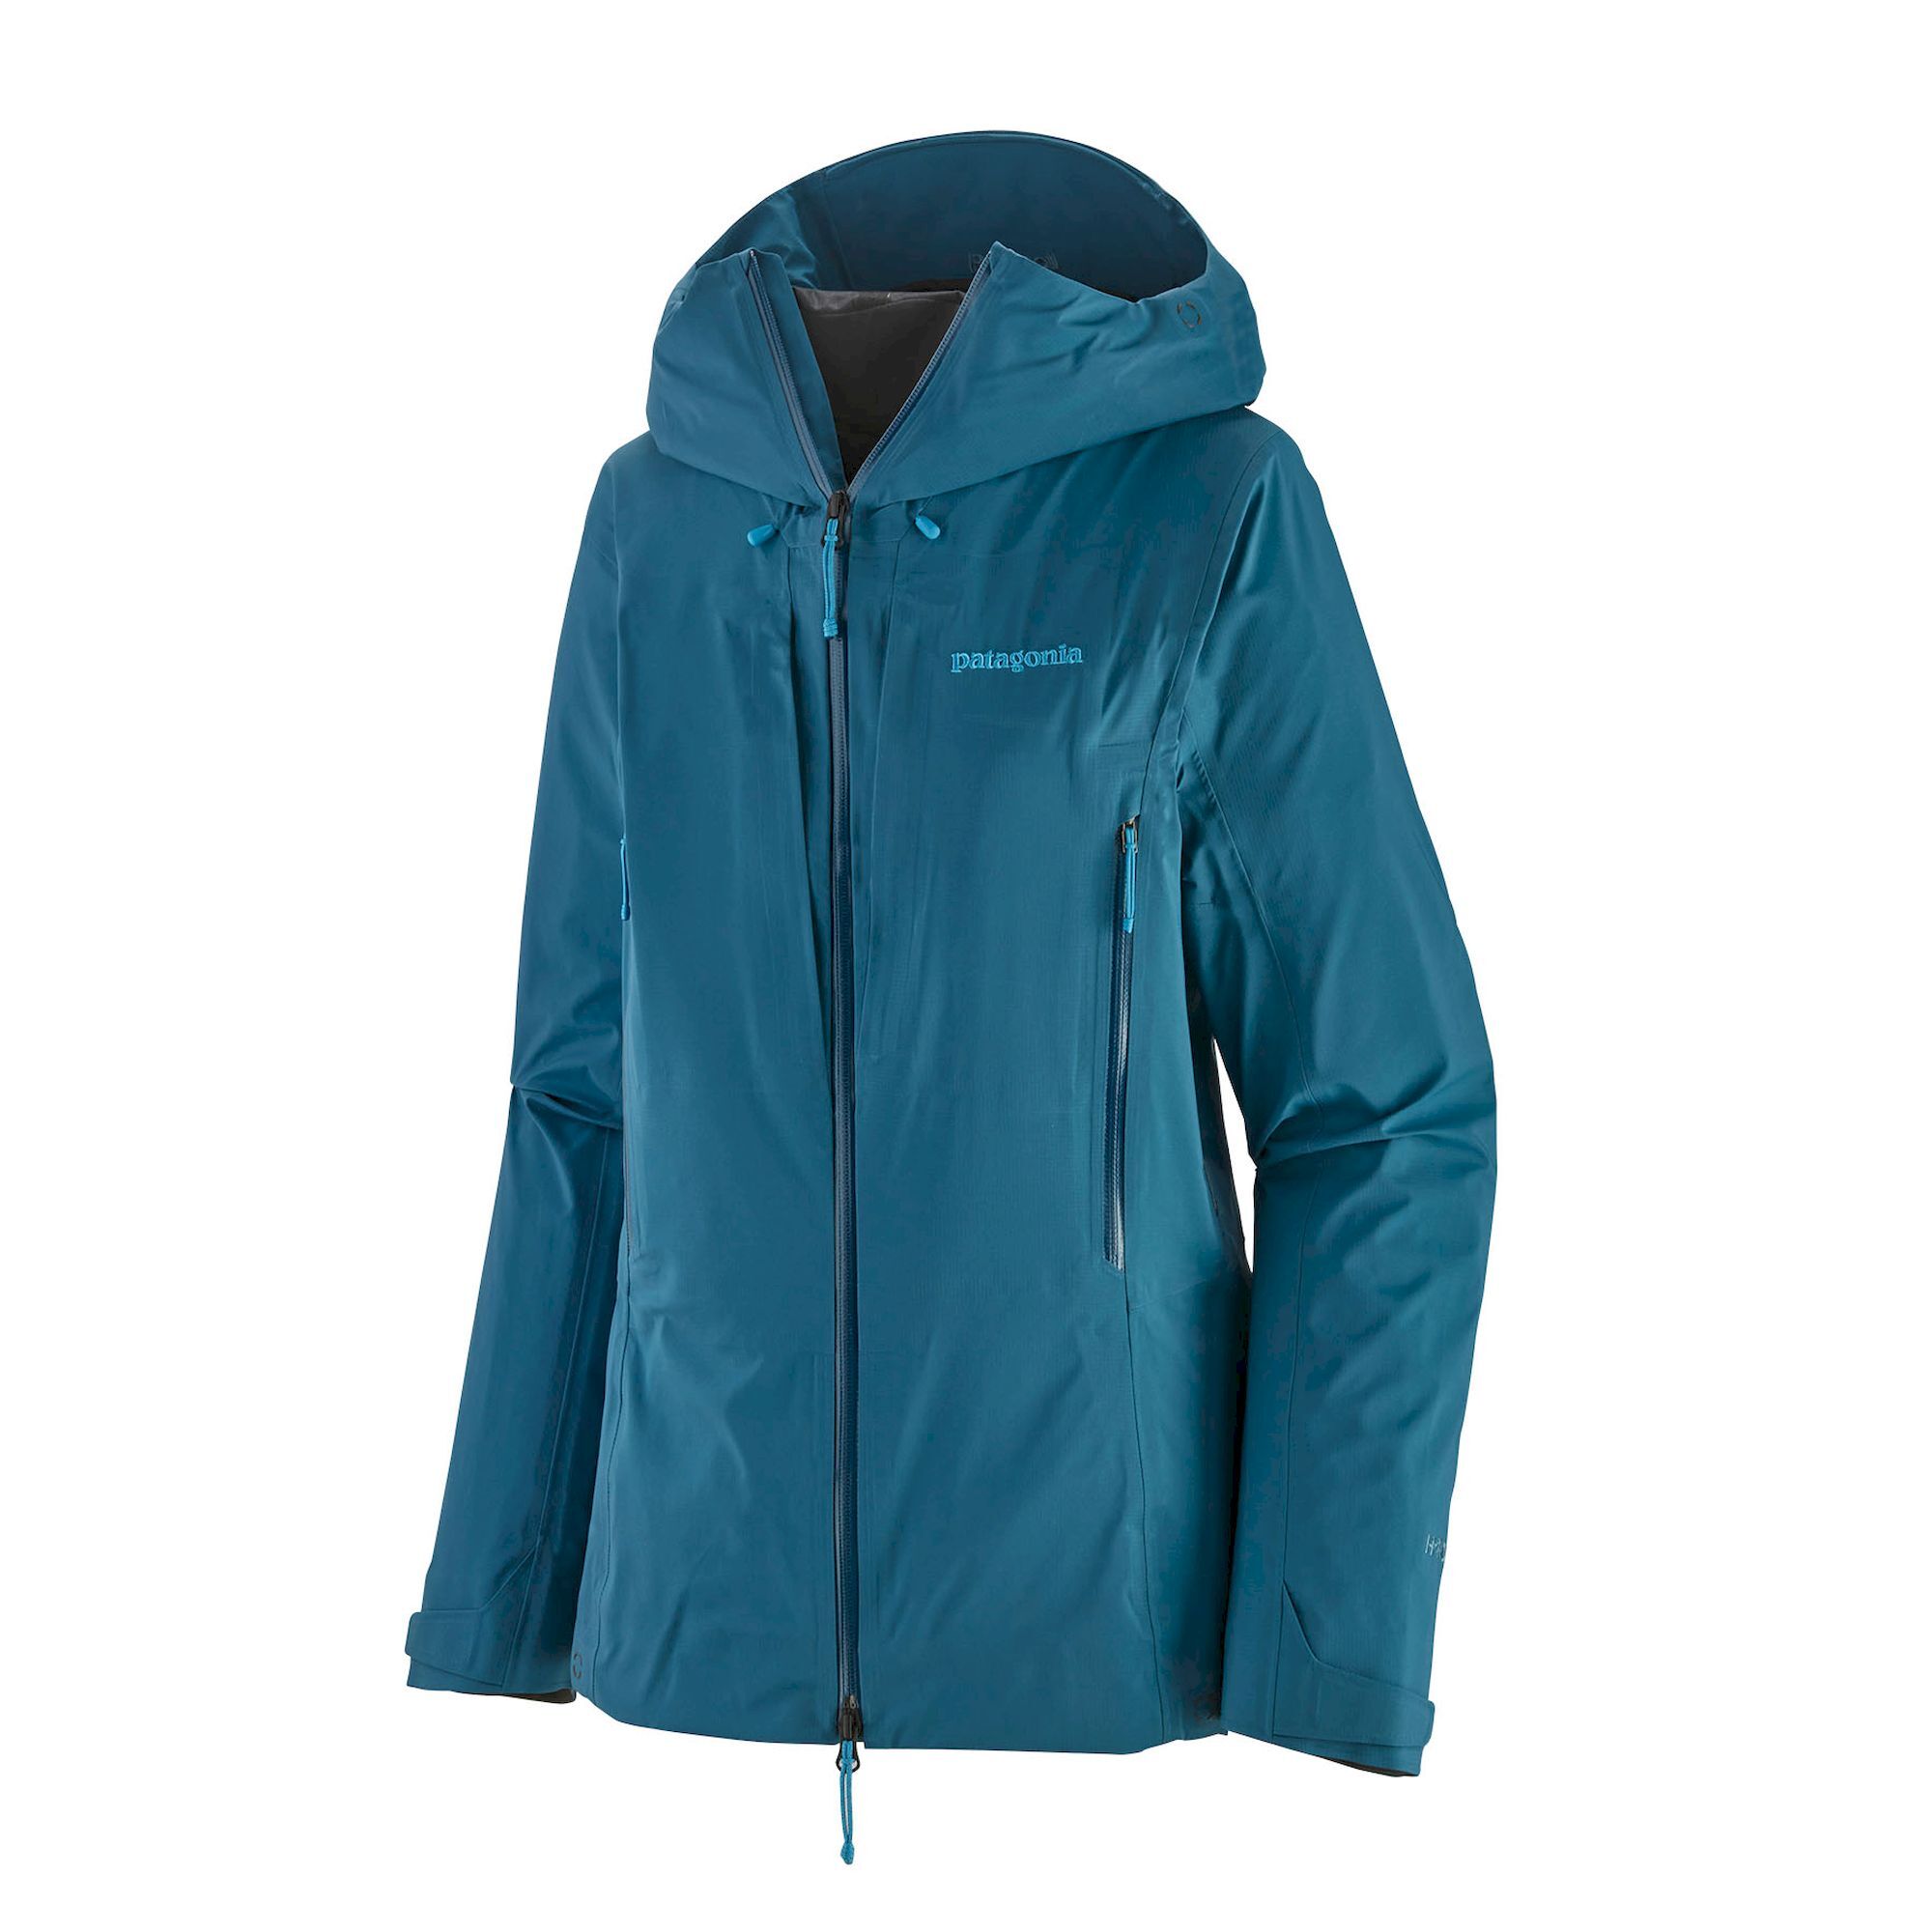 Patagonia Dual Aspect Jacket - Chaqueta impermeable - Mujer